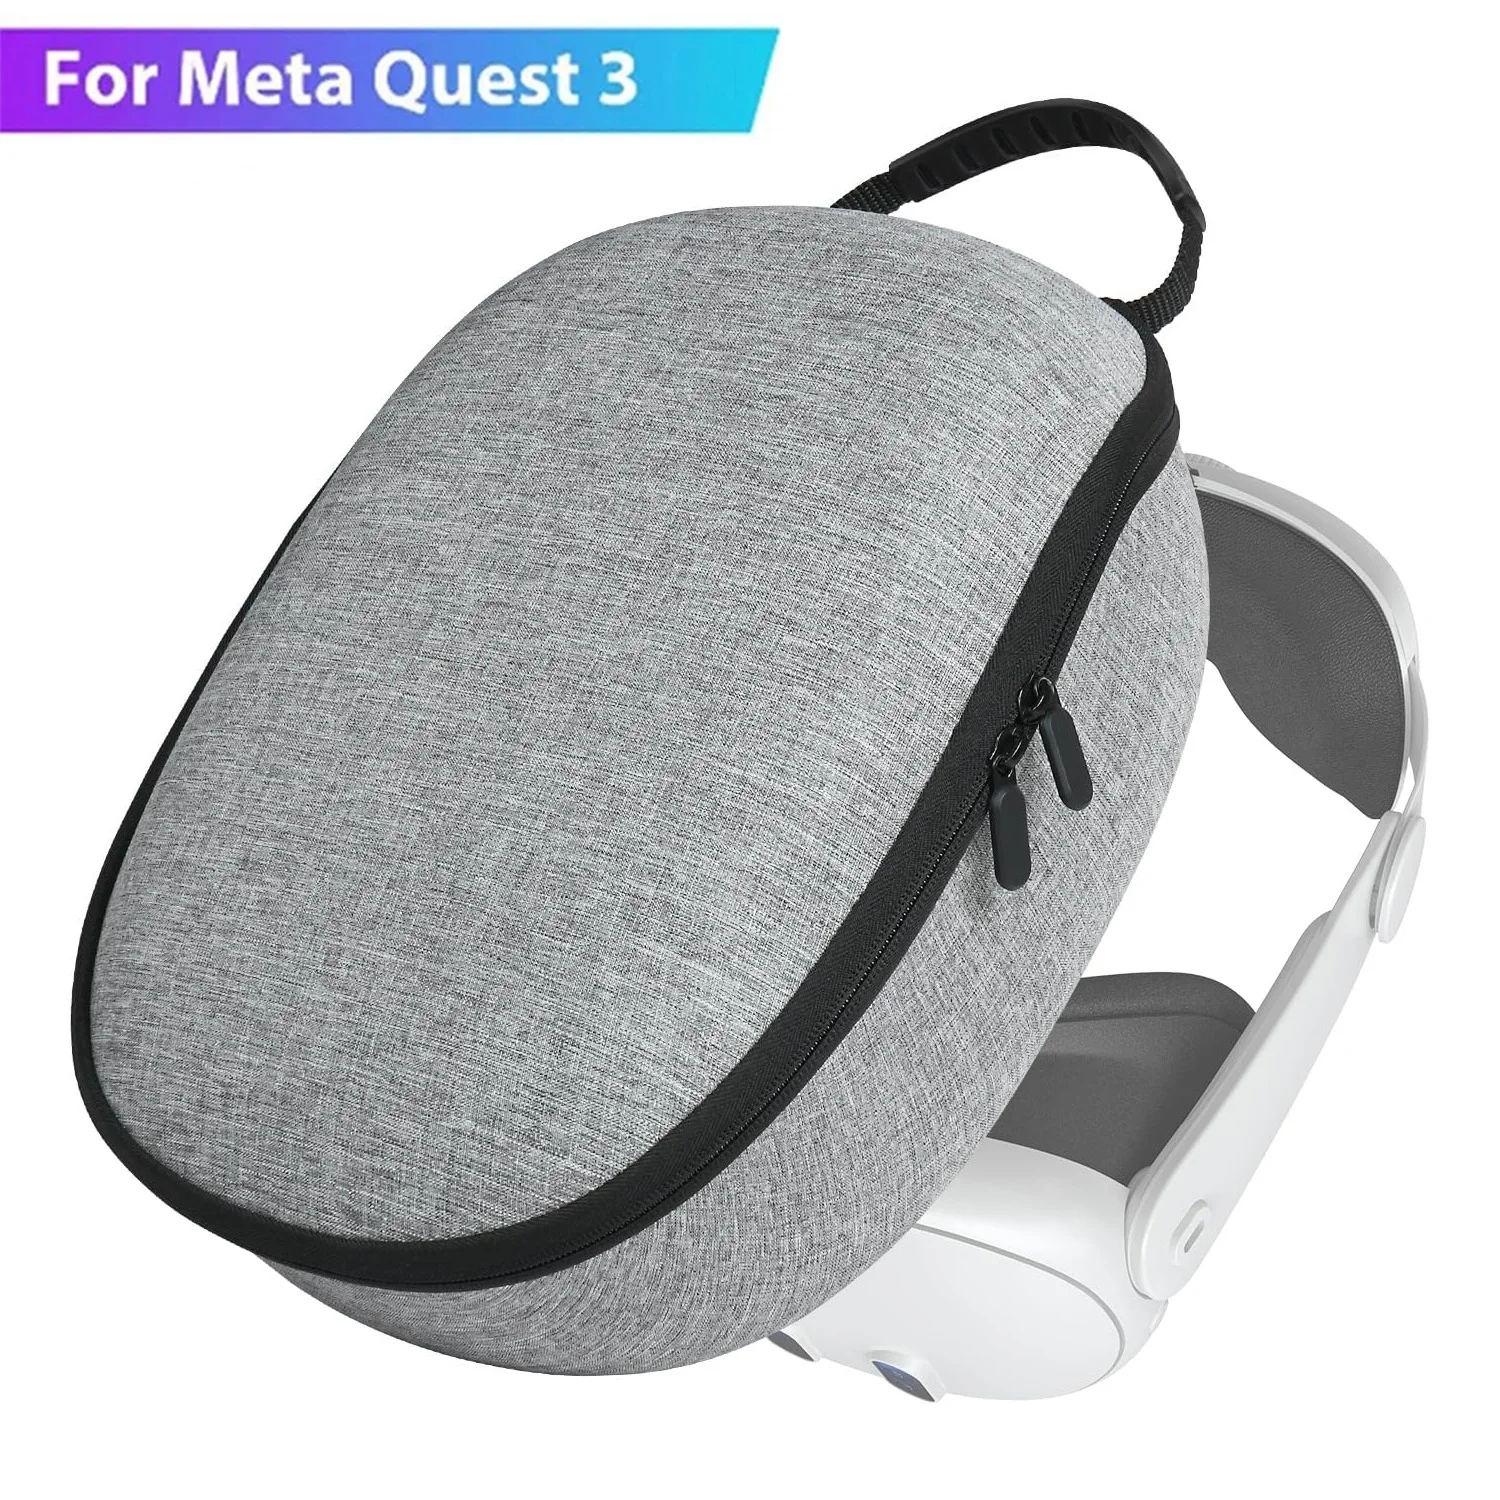 

Travel Carrying Case for Meta Quest 3 VR Headset Controllers Elite Strap Portable Storage Bag for Meta Quest 3 Accessories